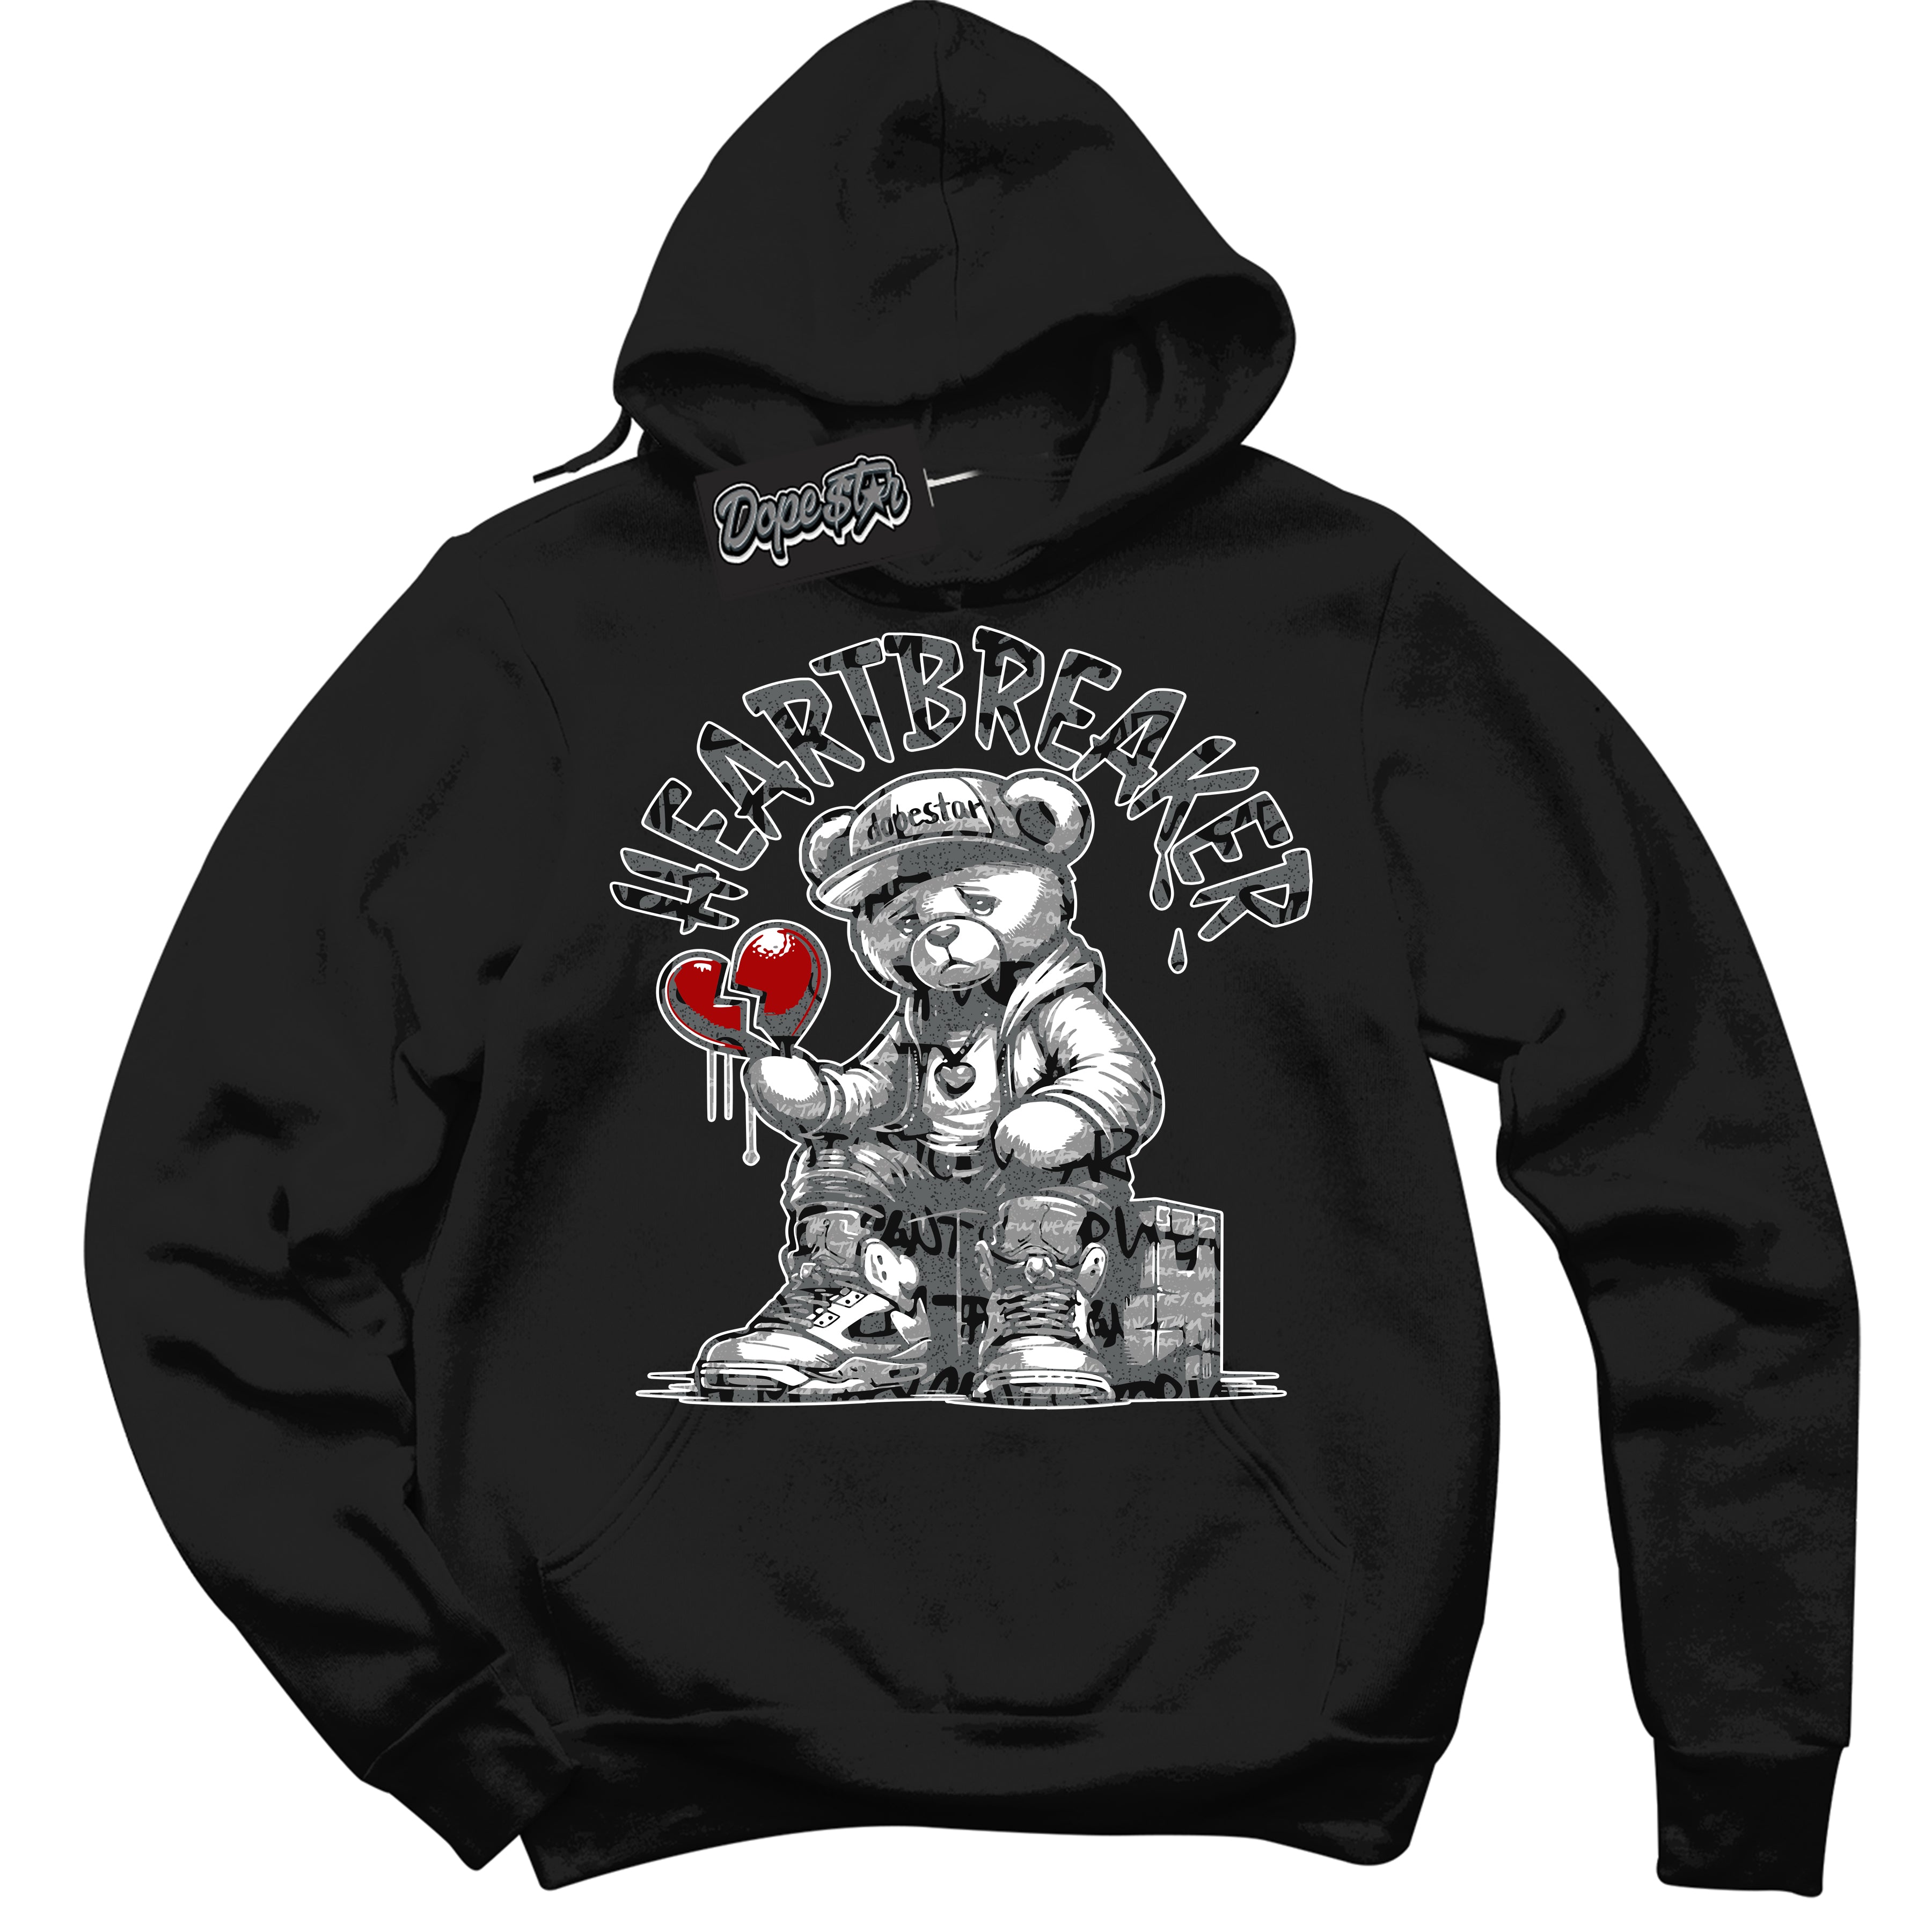 Cool Black Hoodie with “ Heartbreaker Bear ”  design that Perfectly Matches Rebellionaire 1s Sneakers.